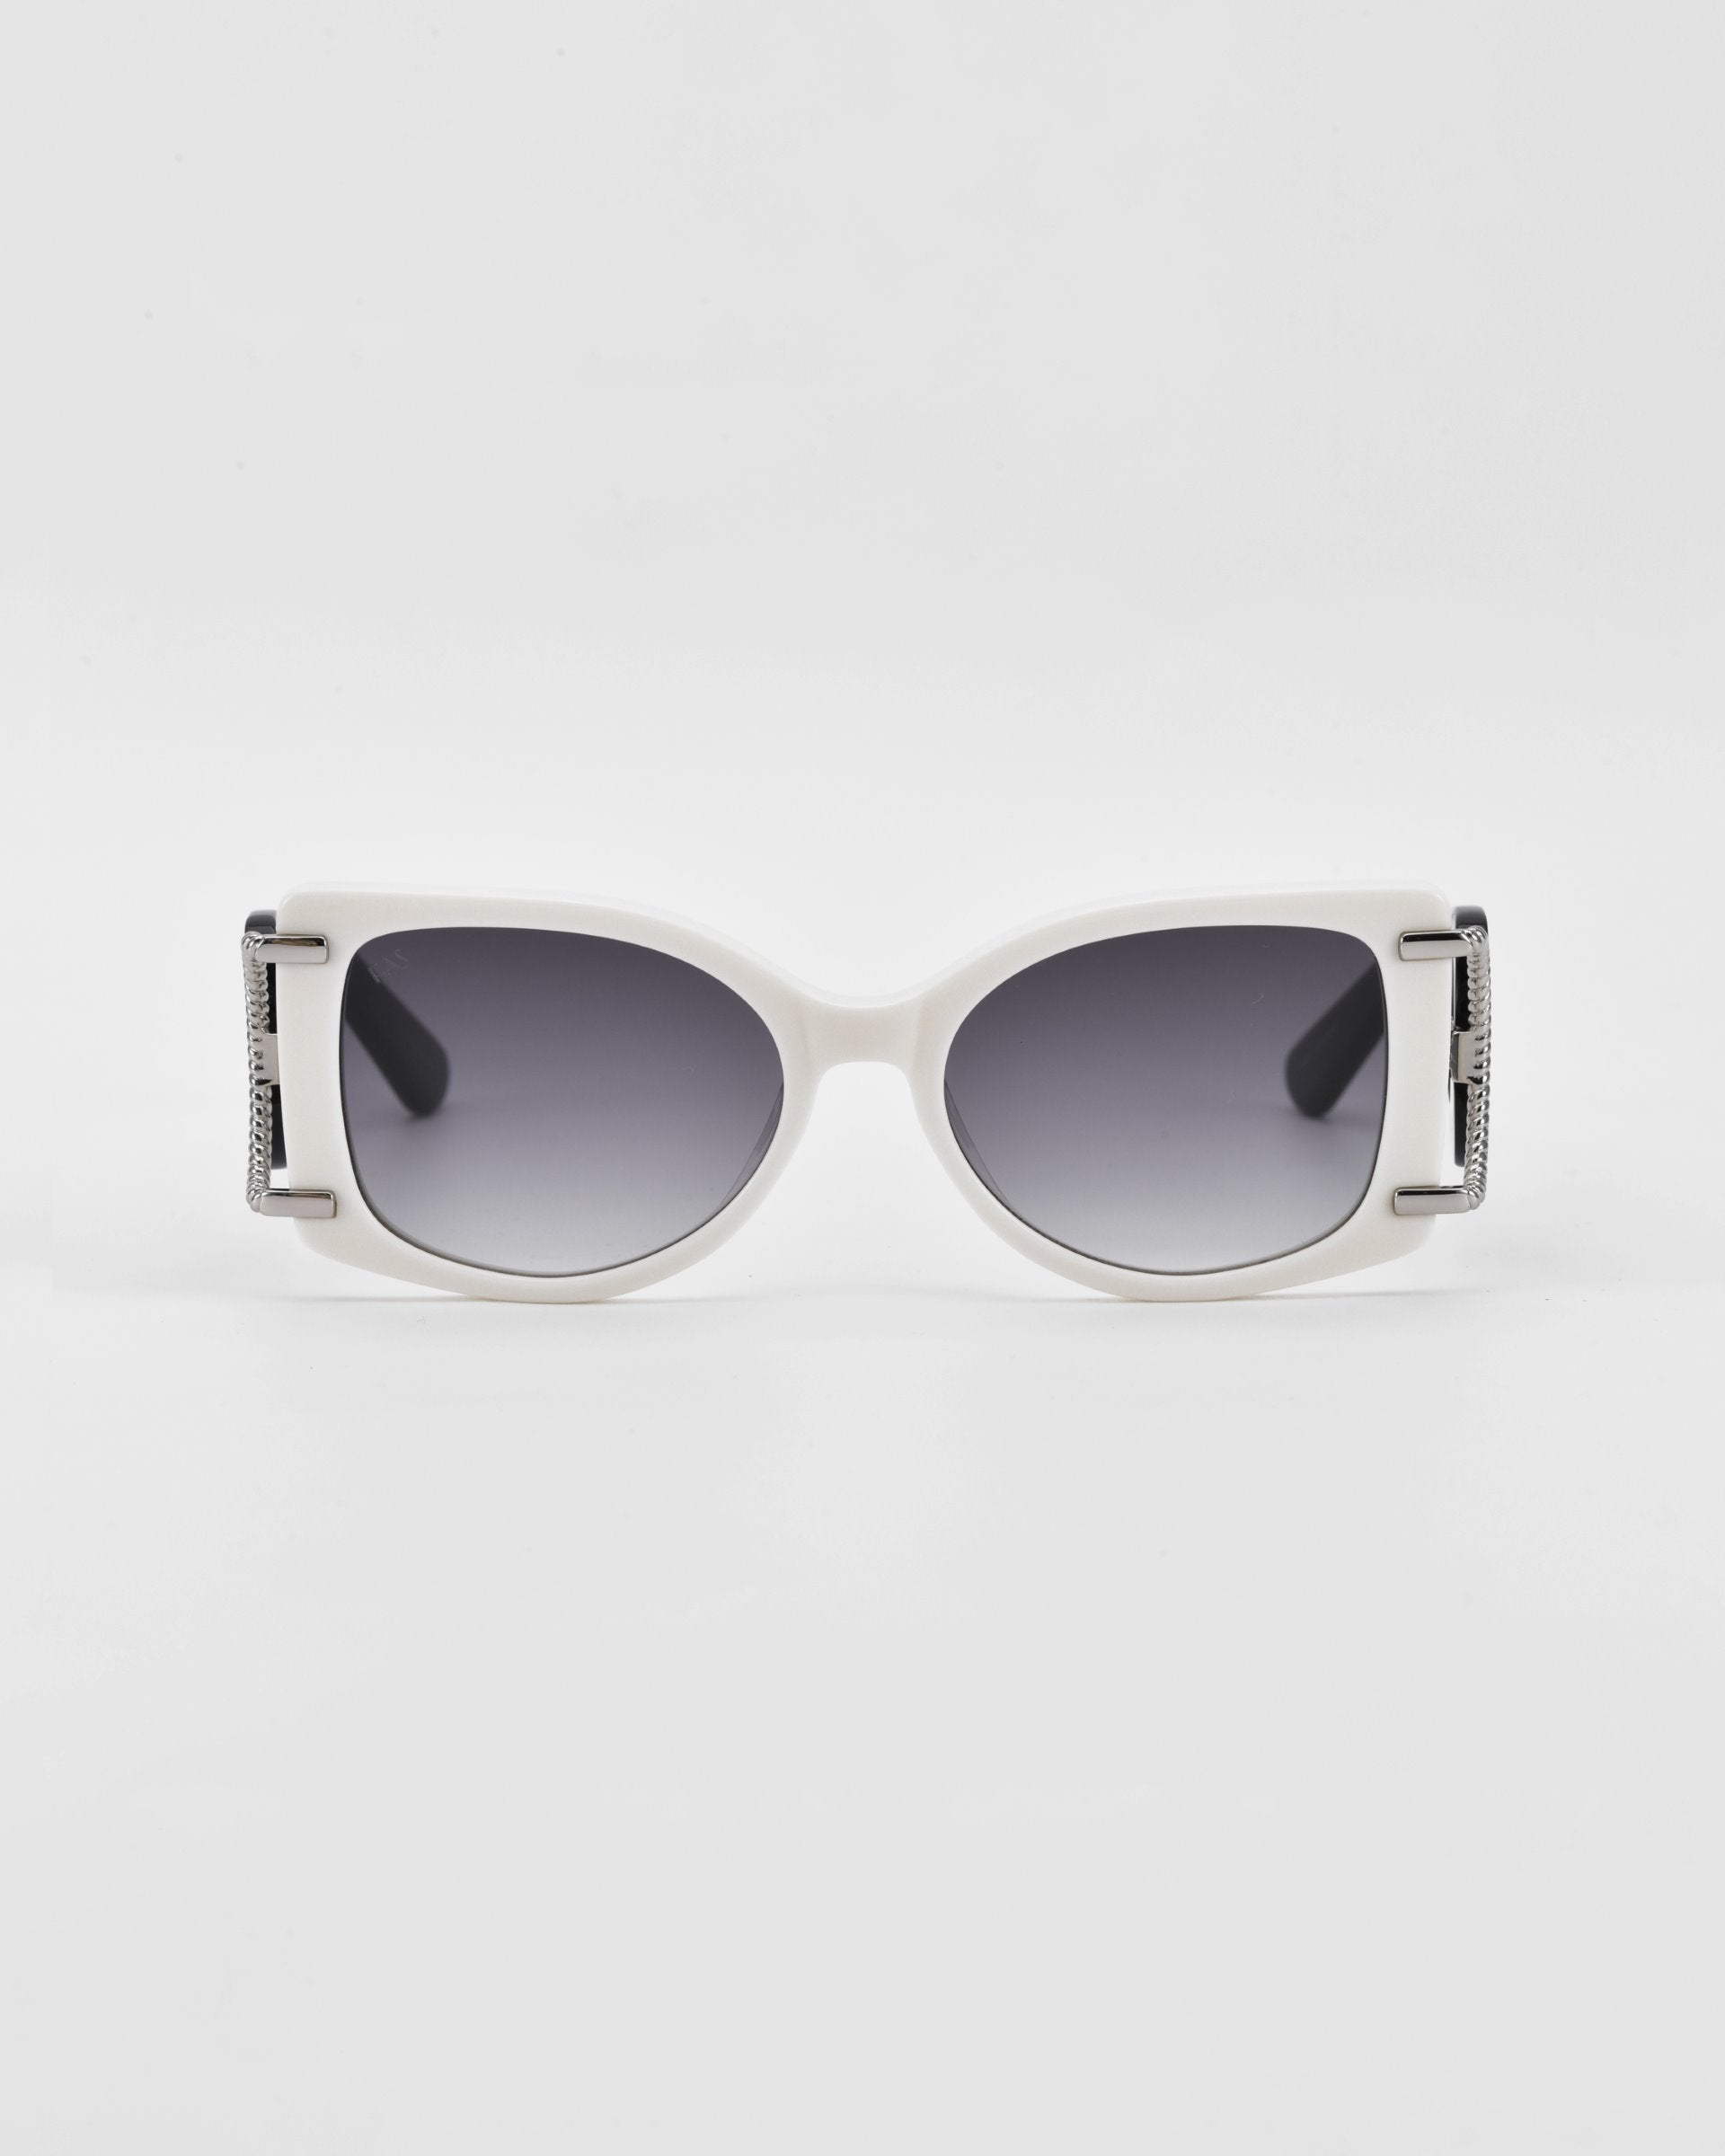 A pair of stylish acetate sunglasses featuring a white frame and dark-tinted lenses. The arms have 18-karat gold-plated hinge details with textured patterns, adding a touch of elegance to the overall design. These Sculpture by For Art's Sake® sunglasses offer 100% UVA & UVB protection, set against a plain, white background.